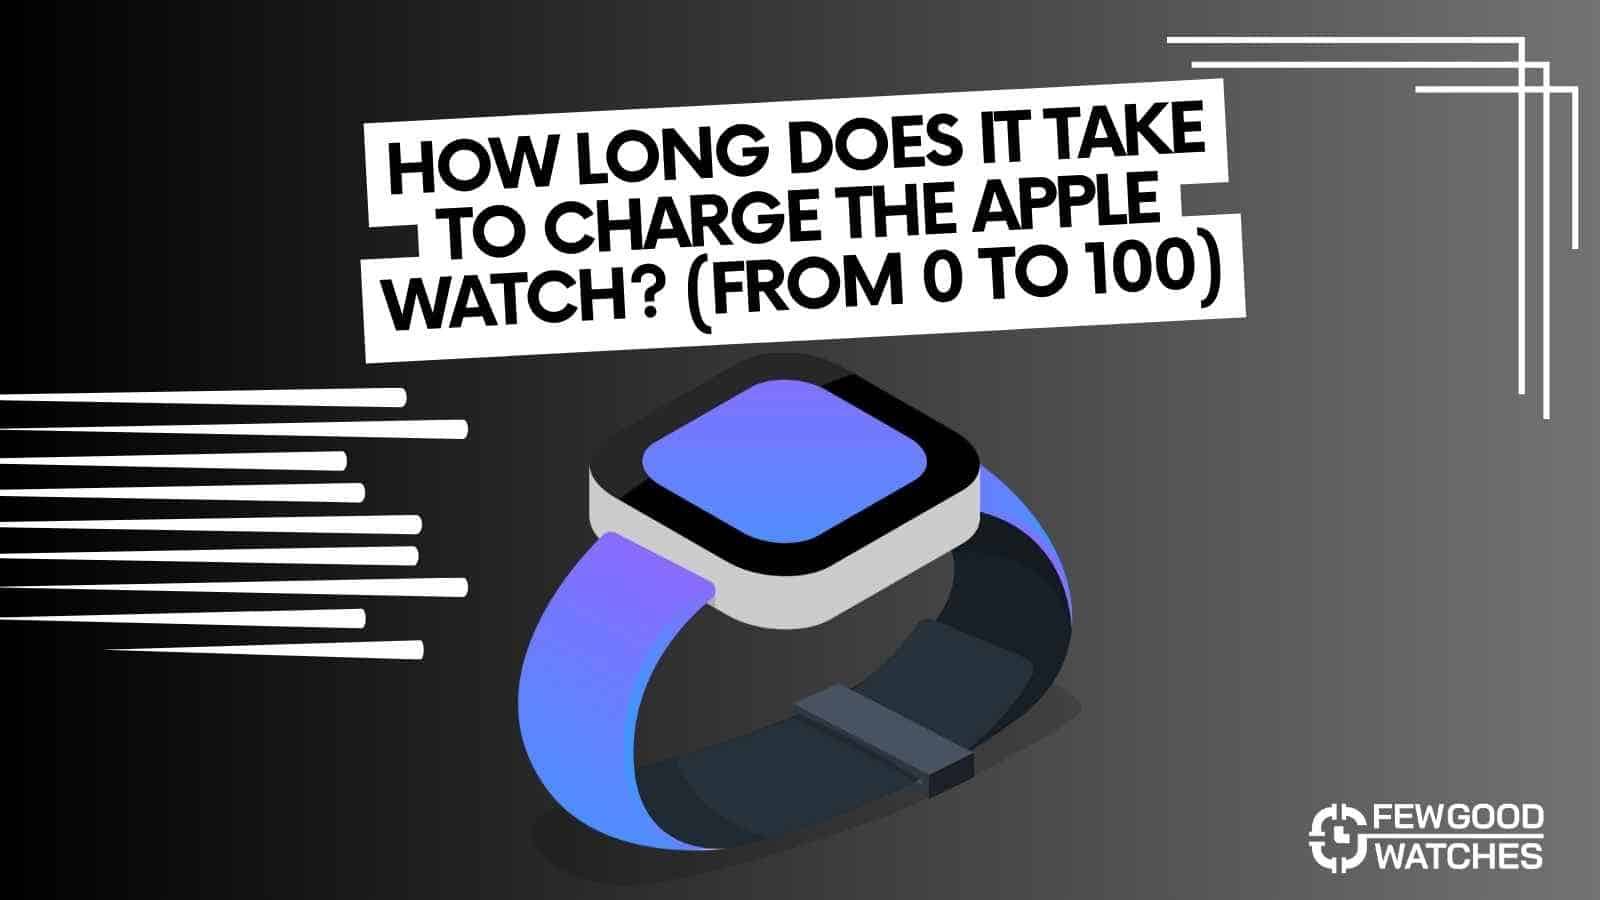 how long does it take to charge apple watch from 0 to 100 percent -answered